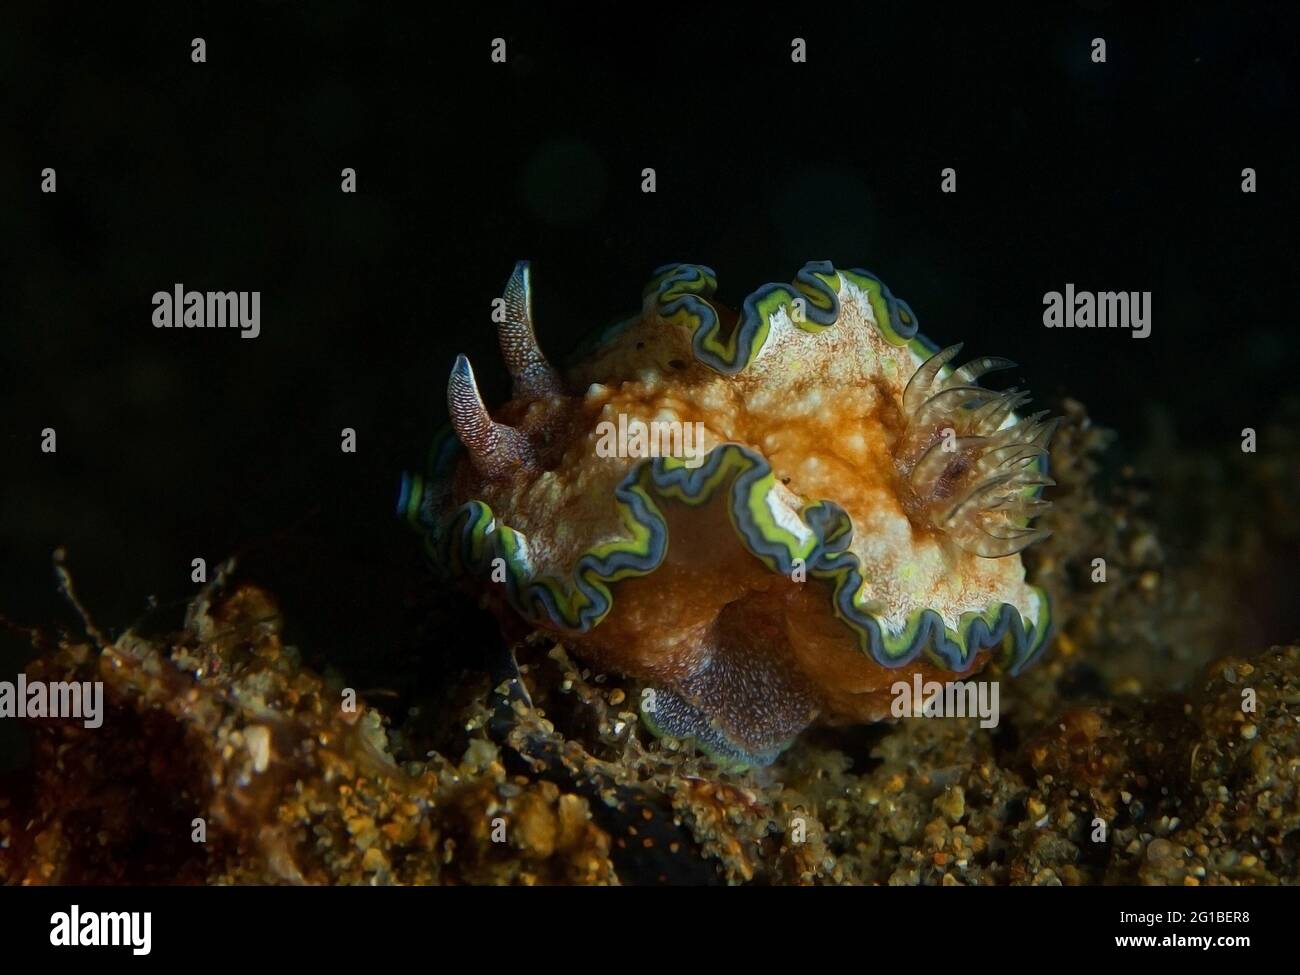 Vivid yellow nudibranch mollusk with blue and green lines and rhinophores crawling on coral reef in dark sea Stock Photo